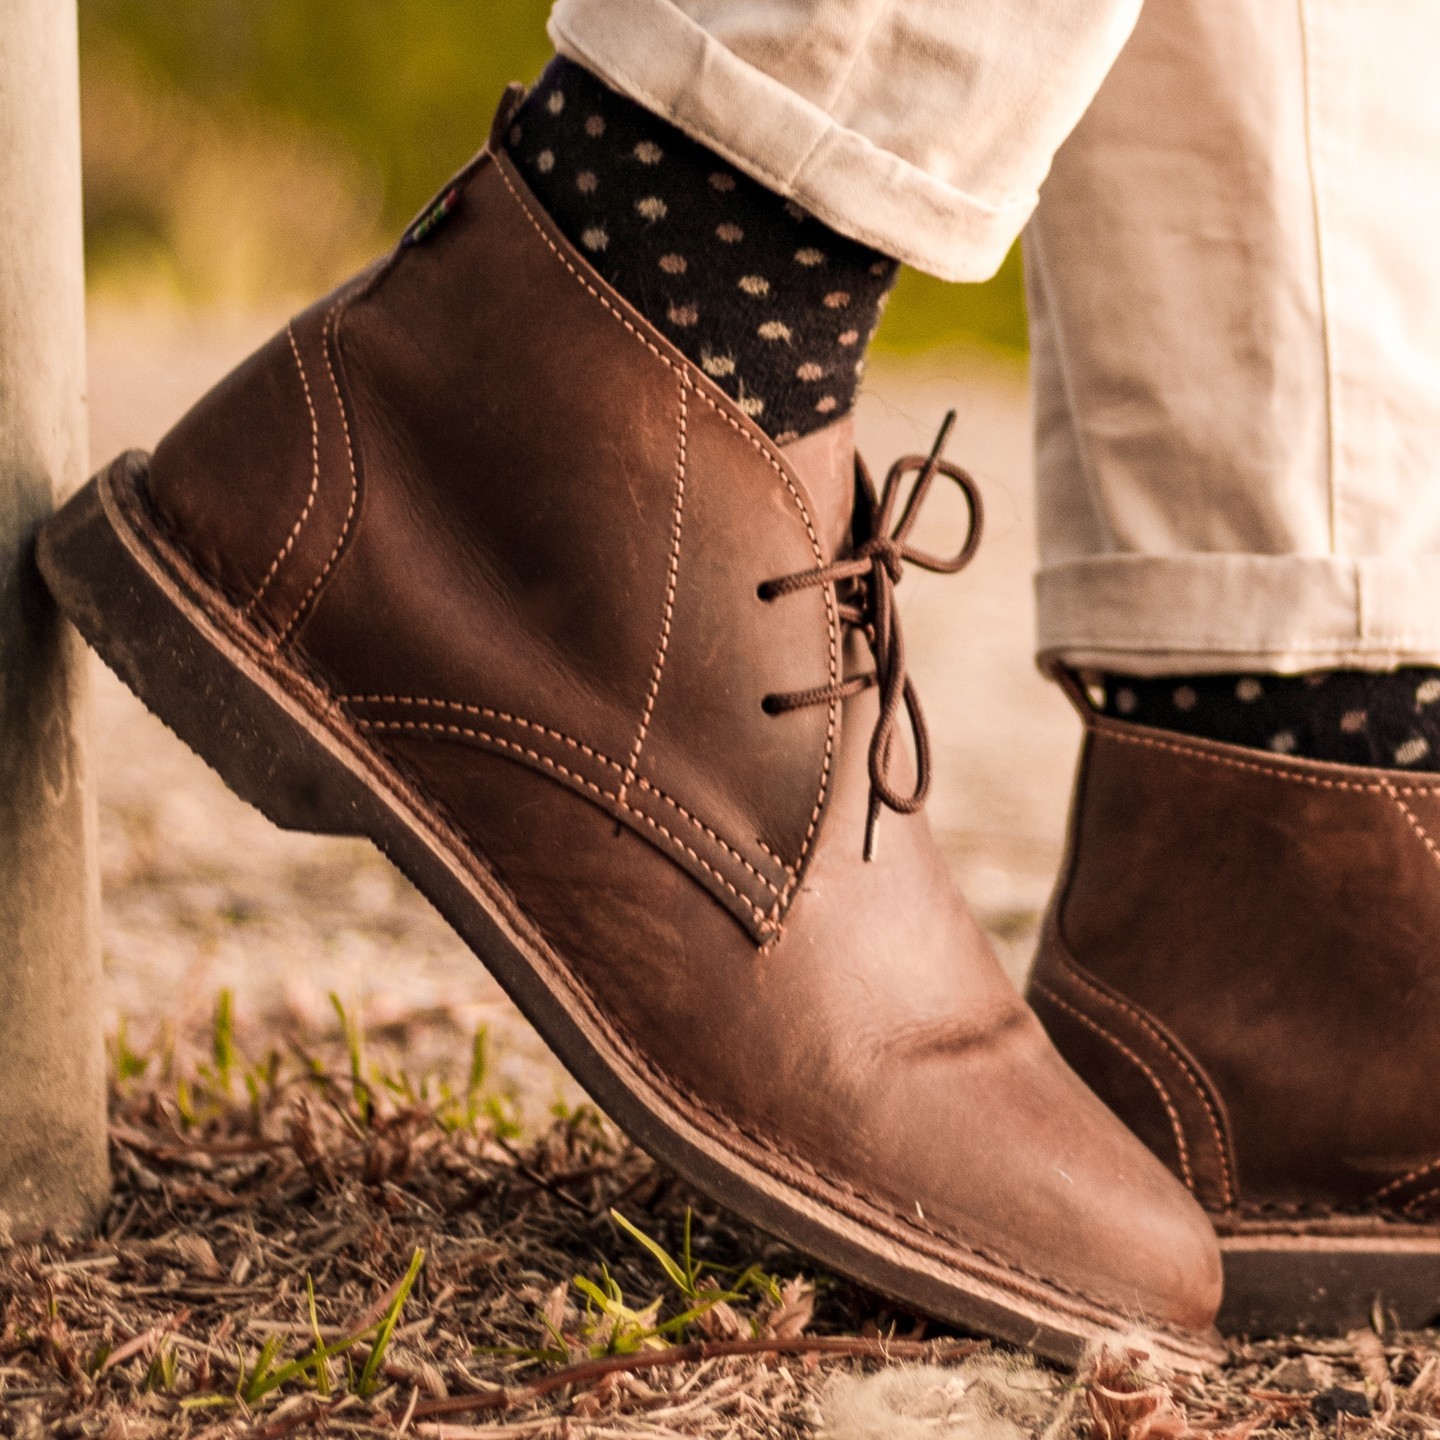 The Ultimate #Chukka Boot. Your new all day, everyday, any occasion shoe #sundaybest